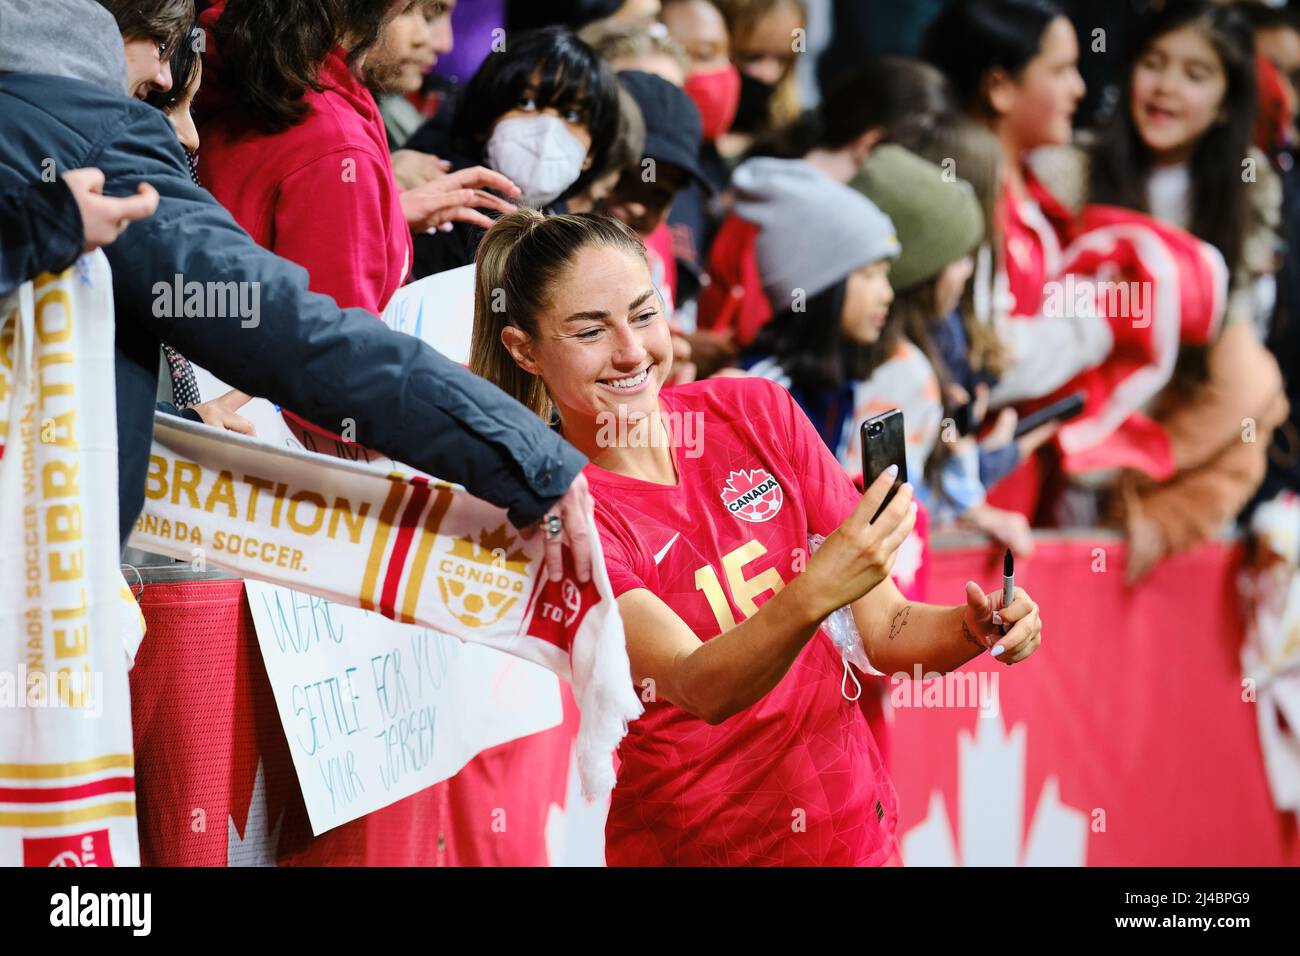 Vancouver, British Columbia, Canada. 8th April, 2022. Janine Beckie of Team Canada taking selfie with fans after the first Canada Soccer’s Women’s Nat Stock Photo